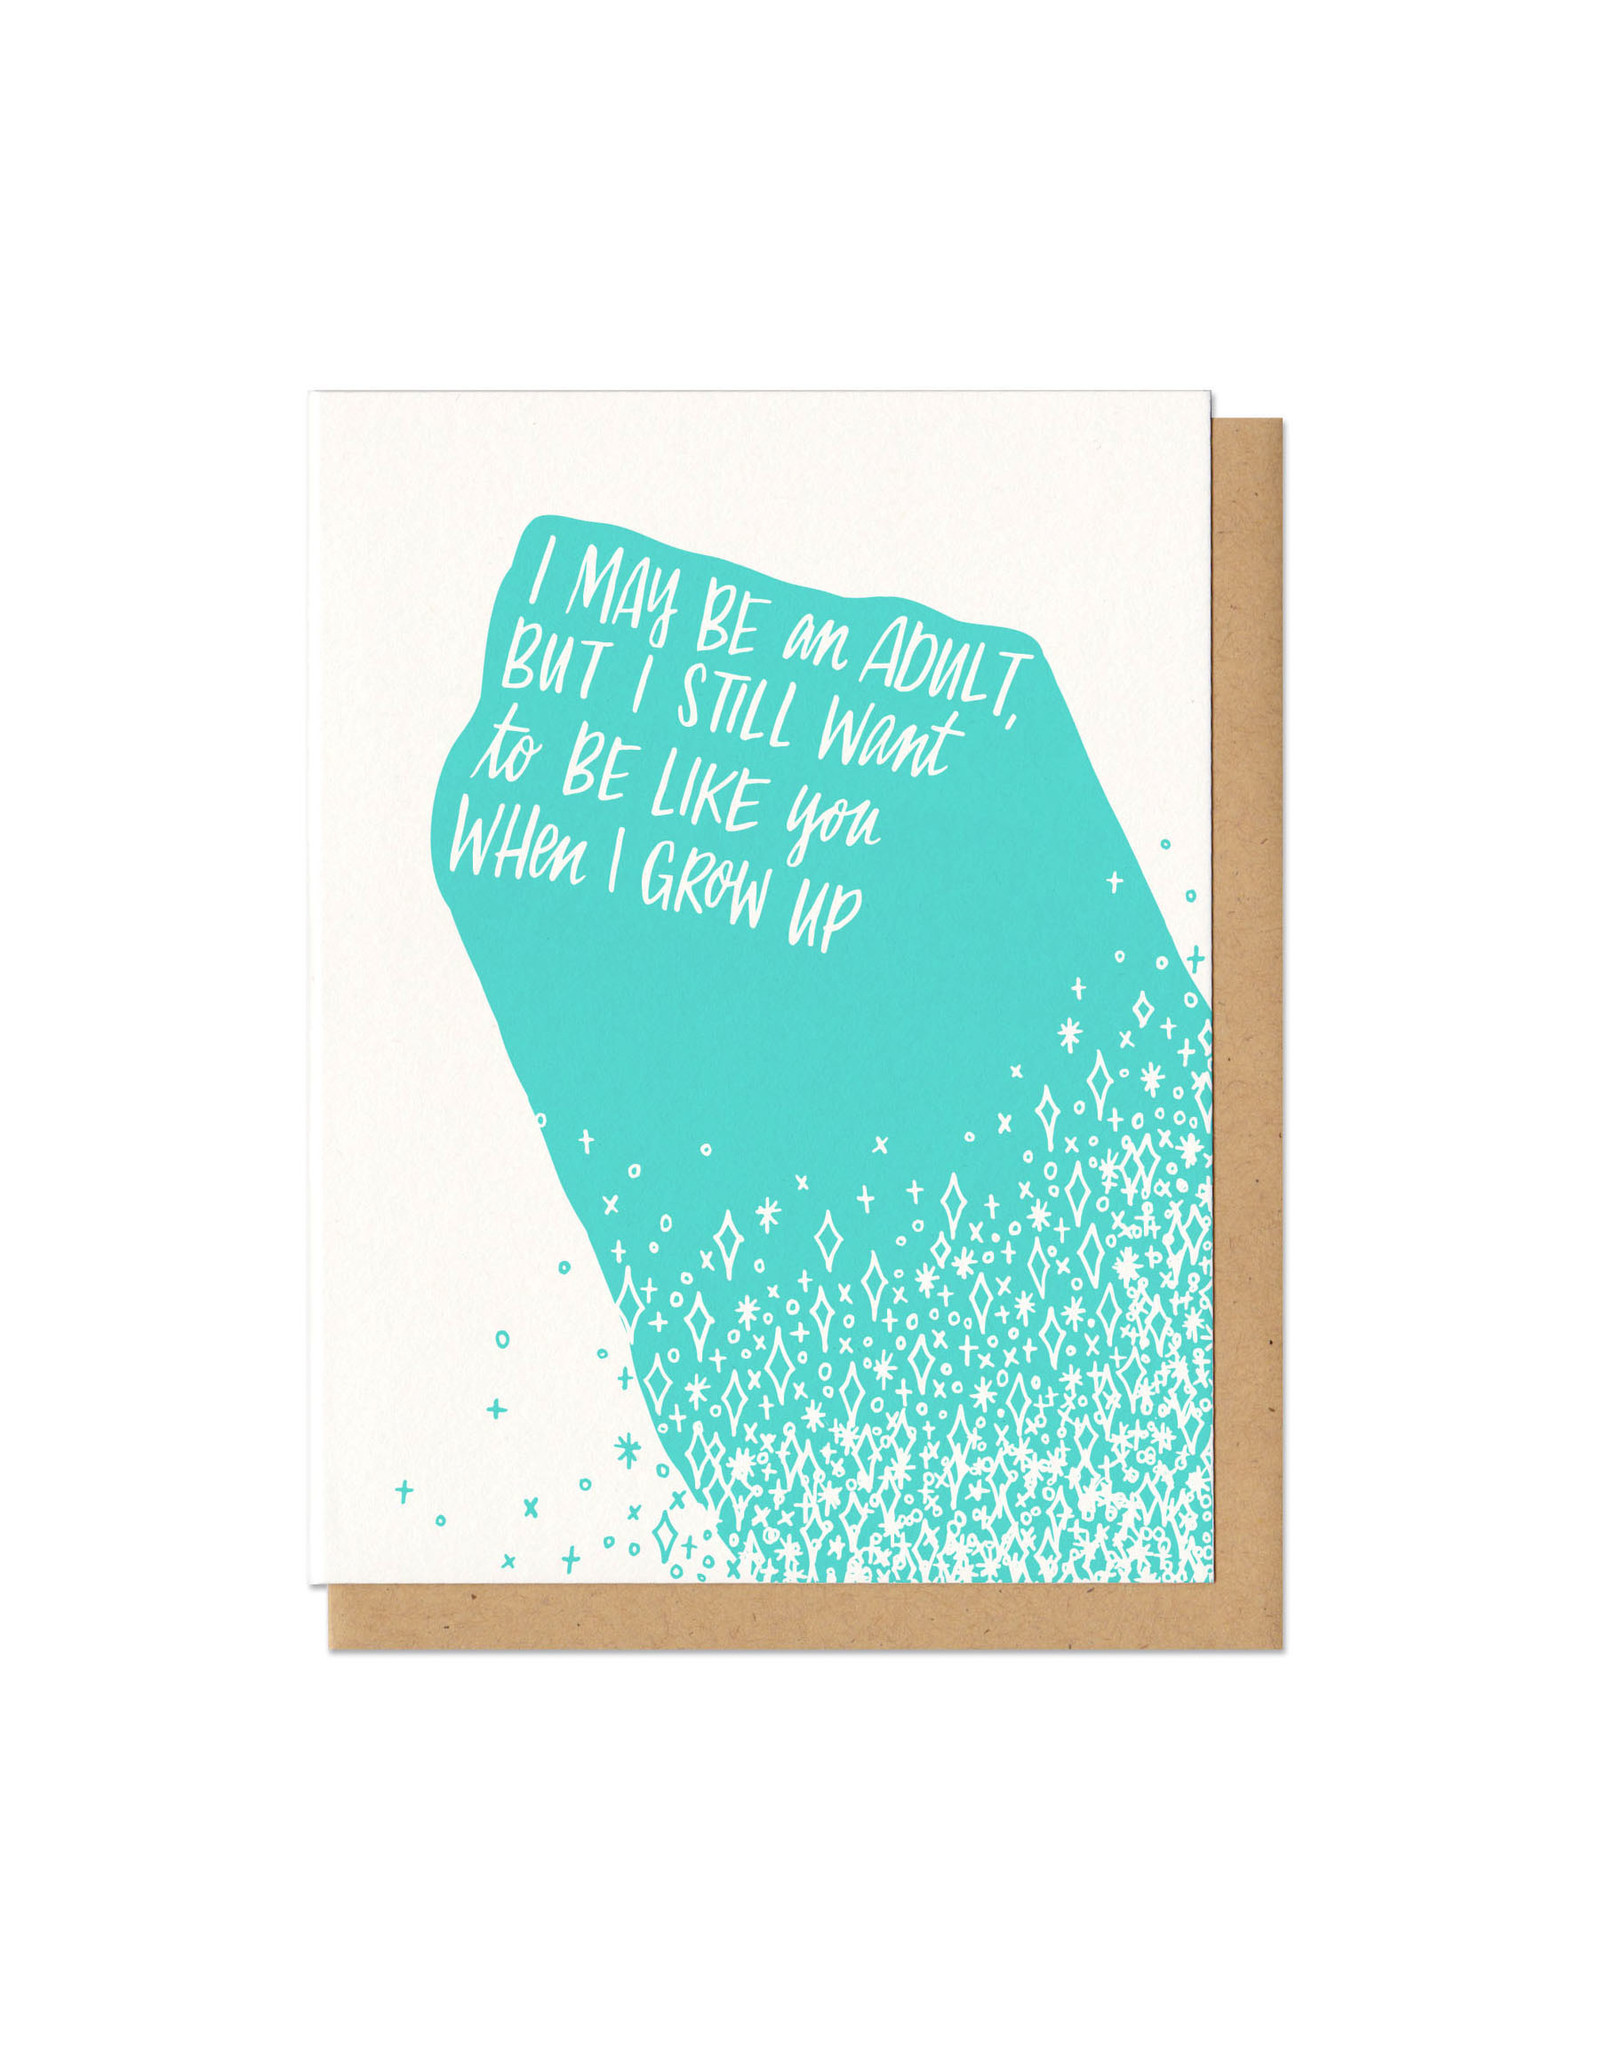 I Still Want to Be Like You When I Grow Up (Light) Greeting Card